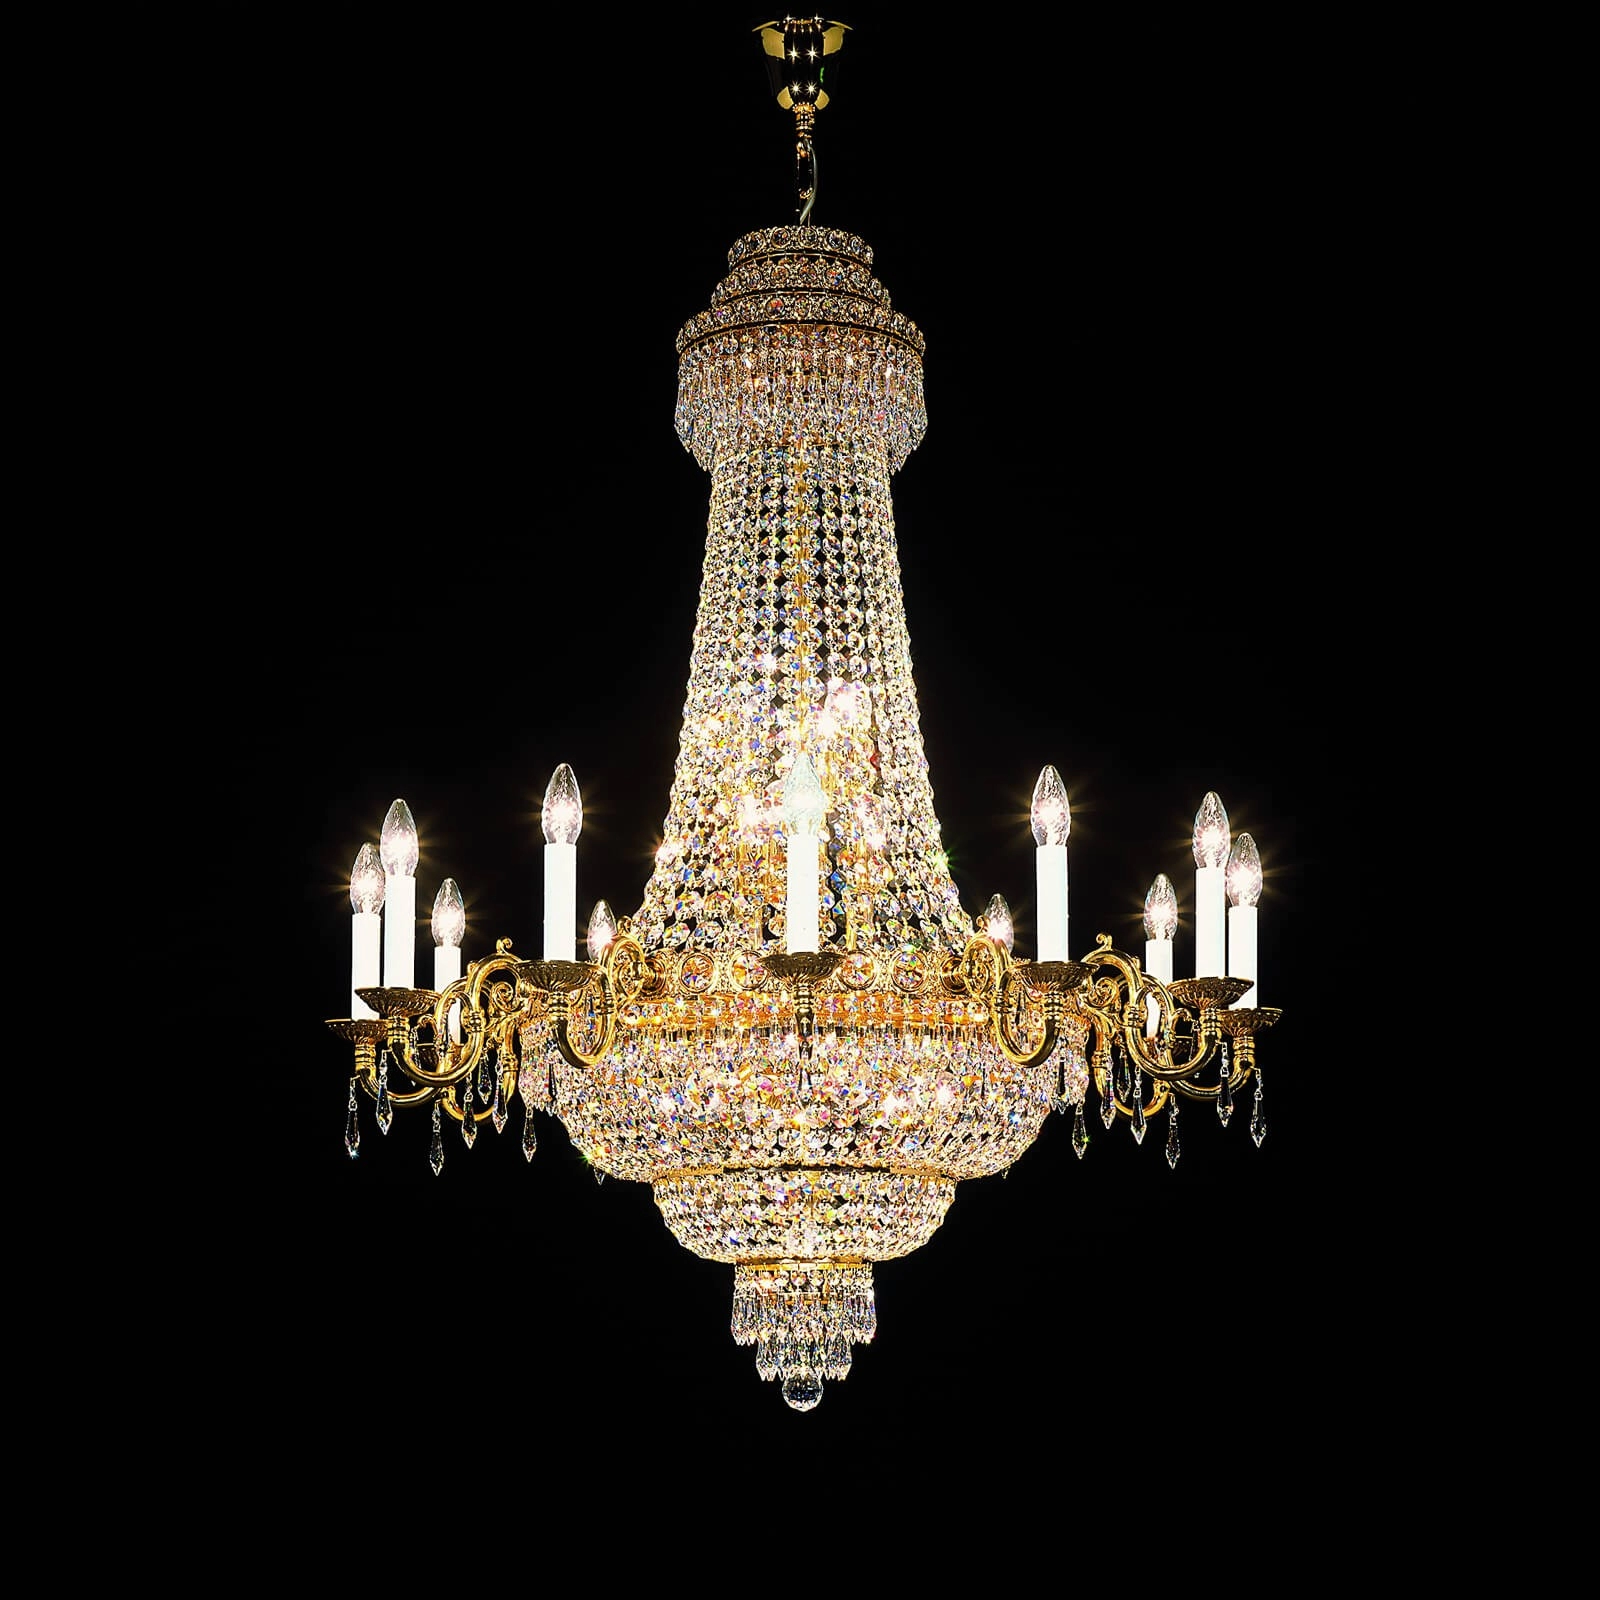 Medium empire crystal chandeliers with long candles